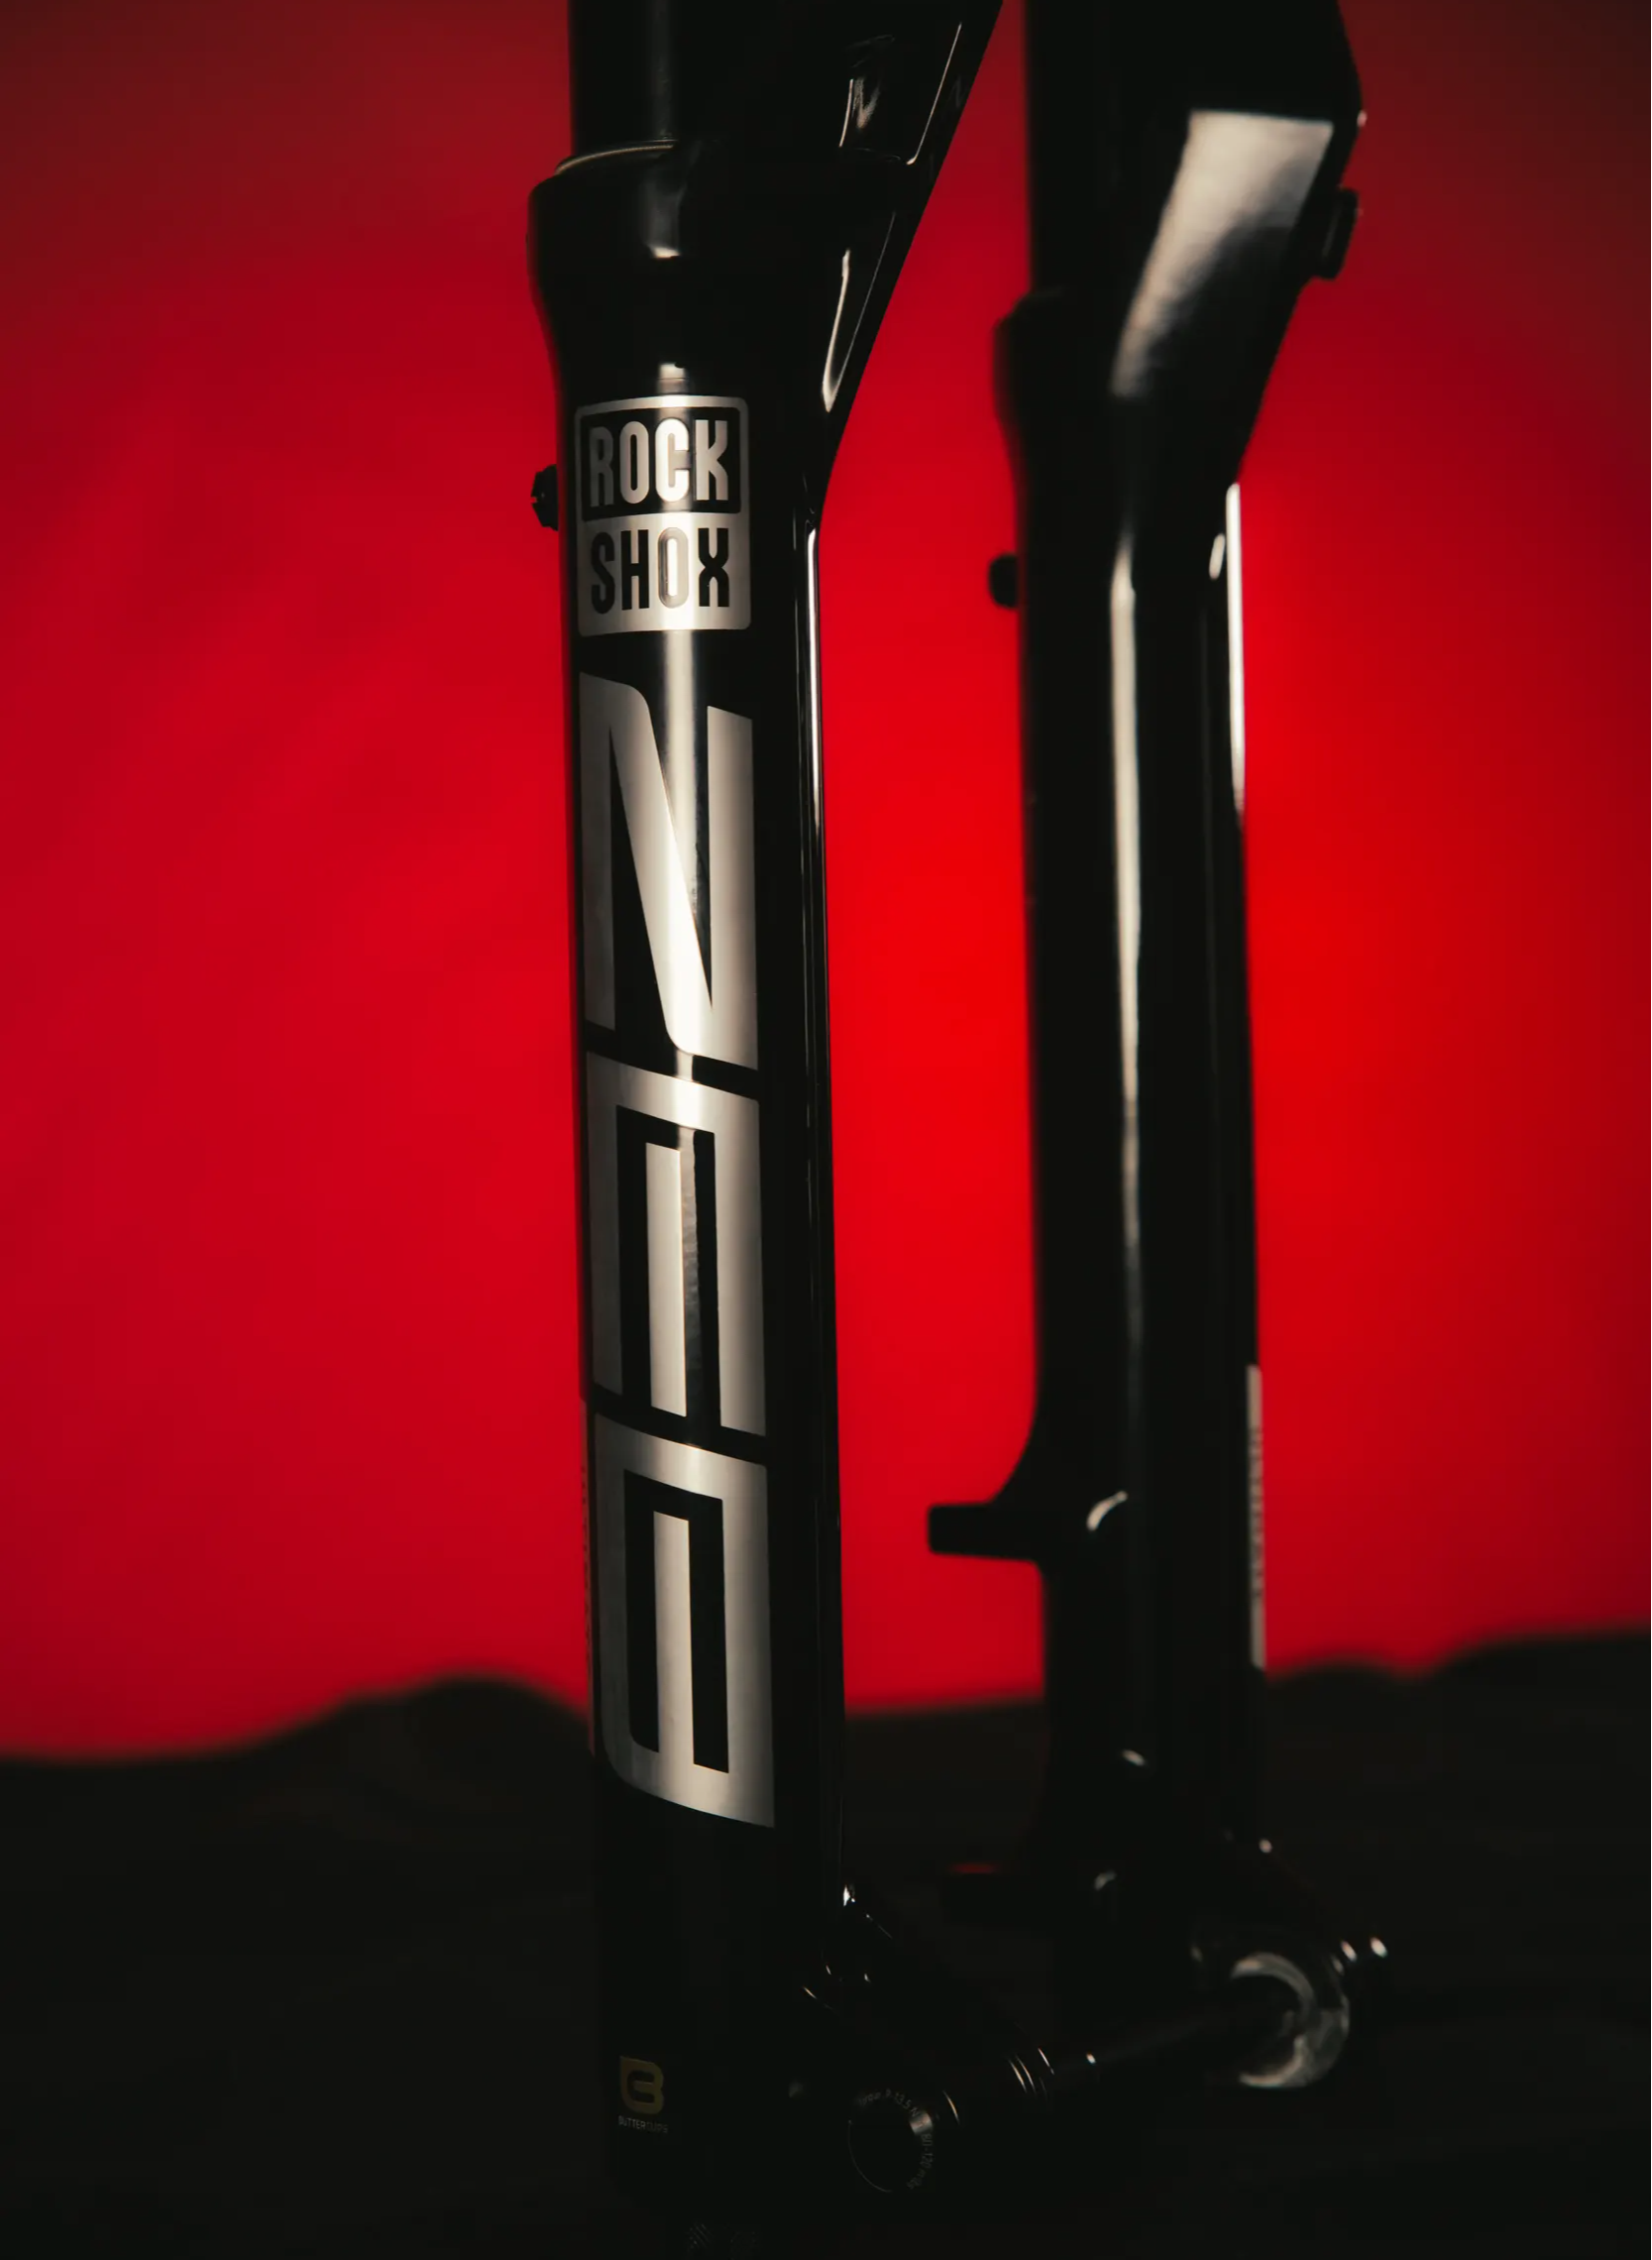 rockshox zeb ultimate mountain bike fork in silver on a red and black background